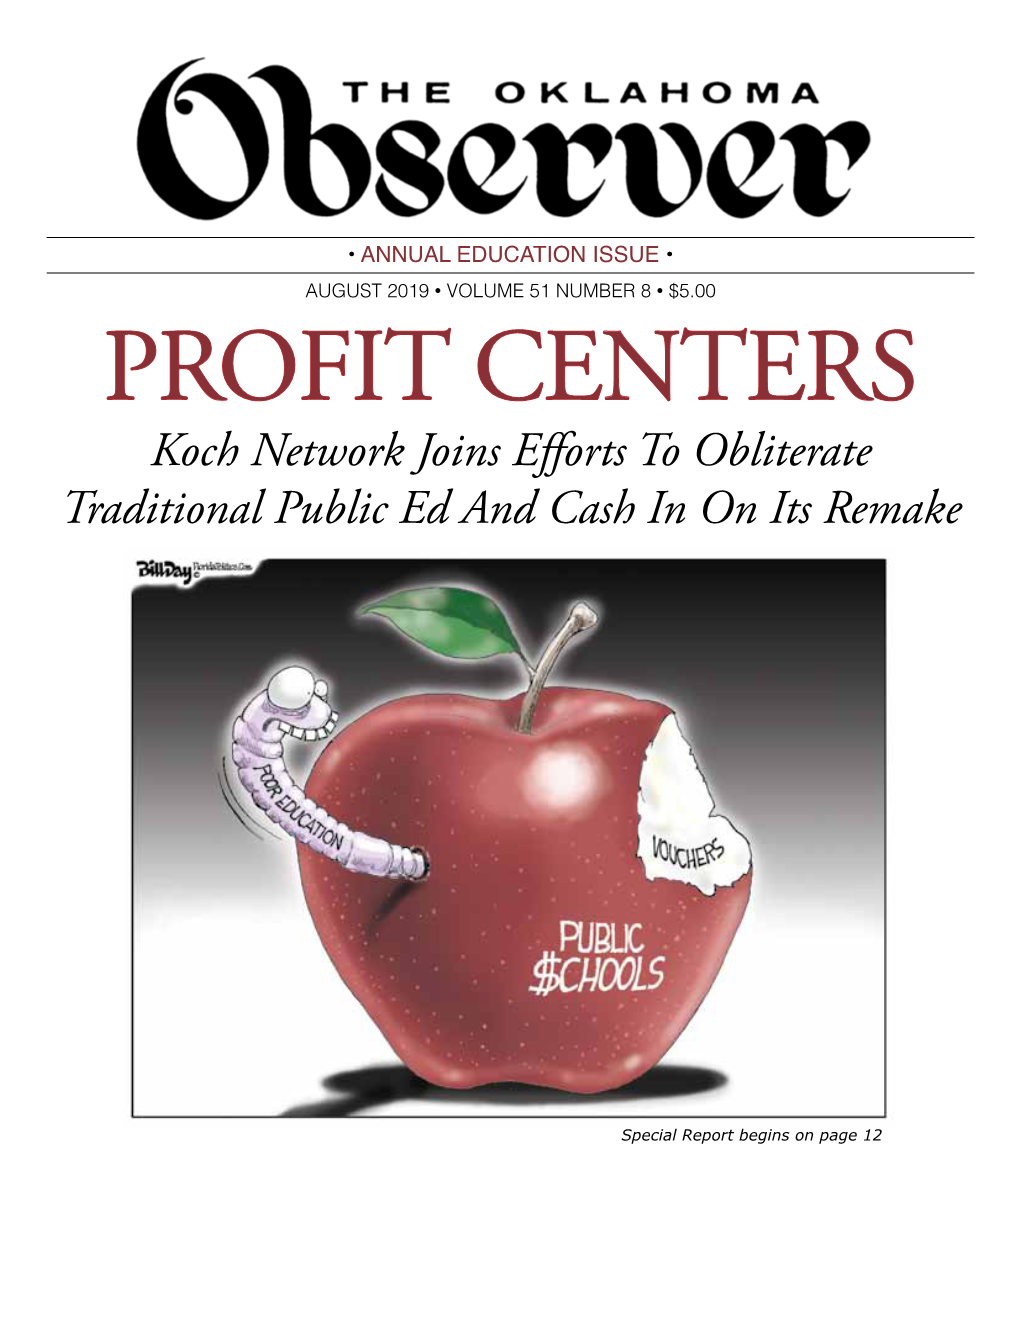 PROFIT CENTERS Koch Network Joins Efforts to Obliterate Traditional Public Ed and Cash in on Its Remake